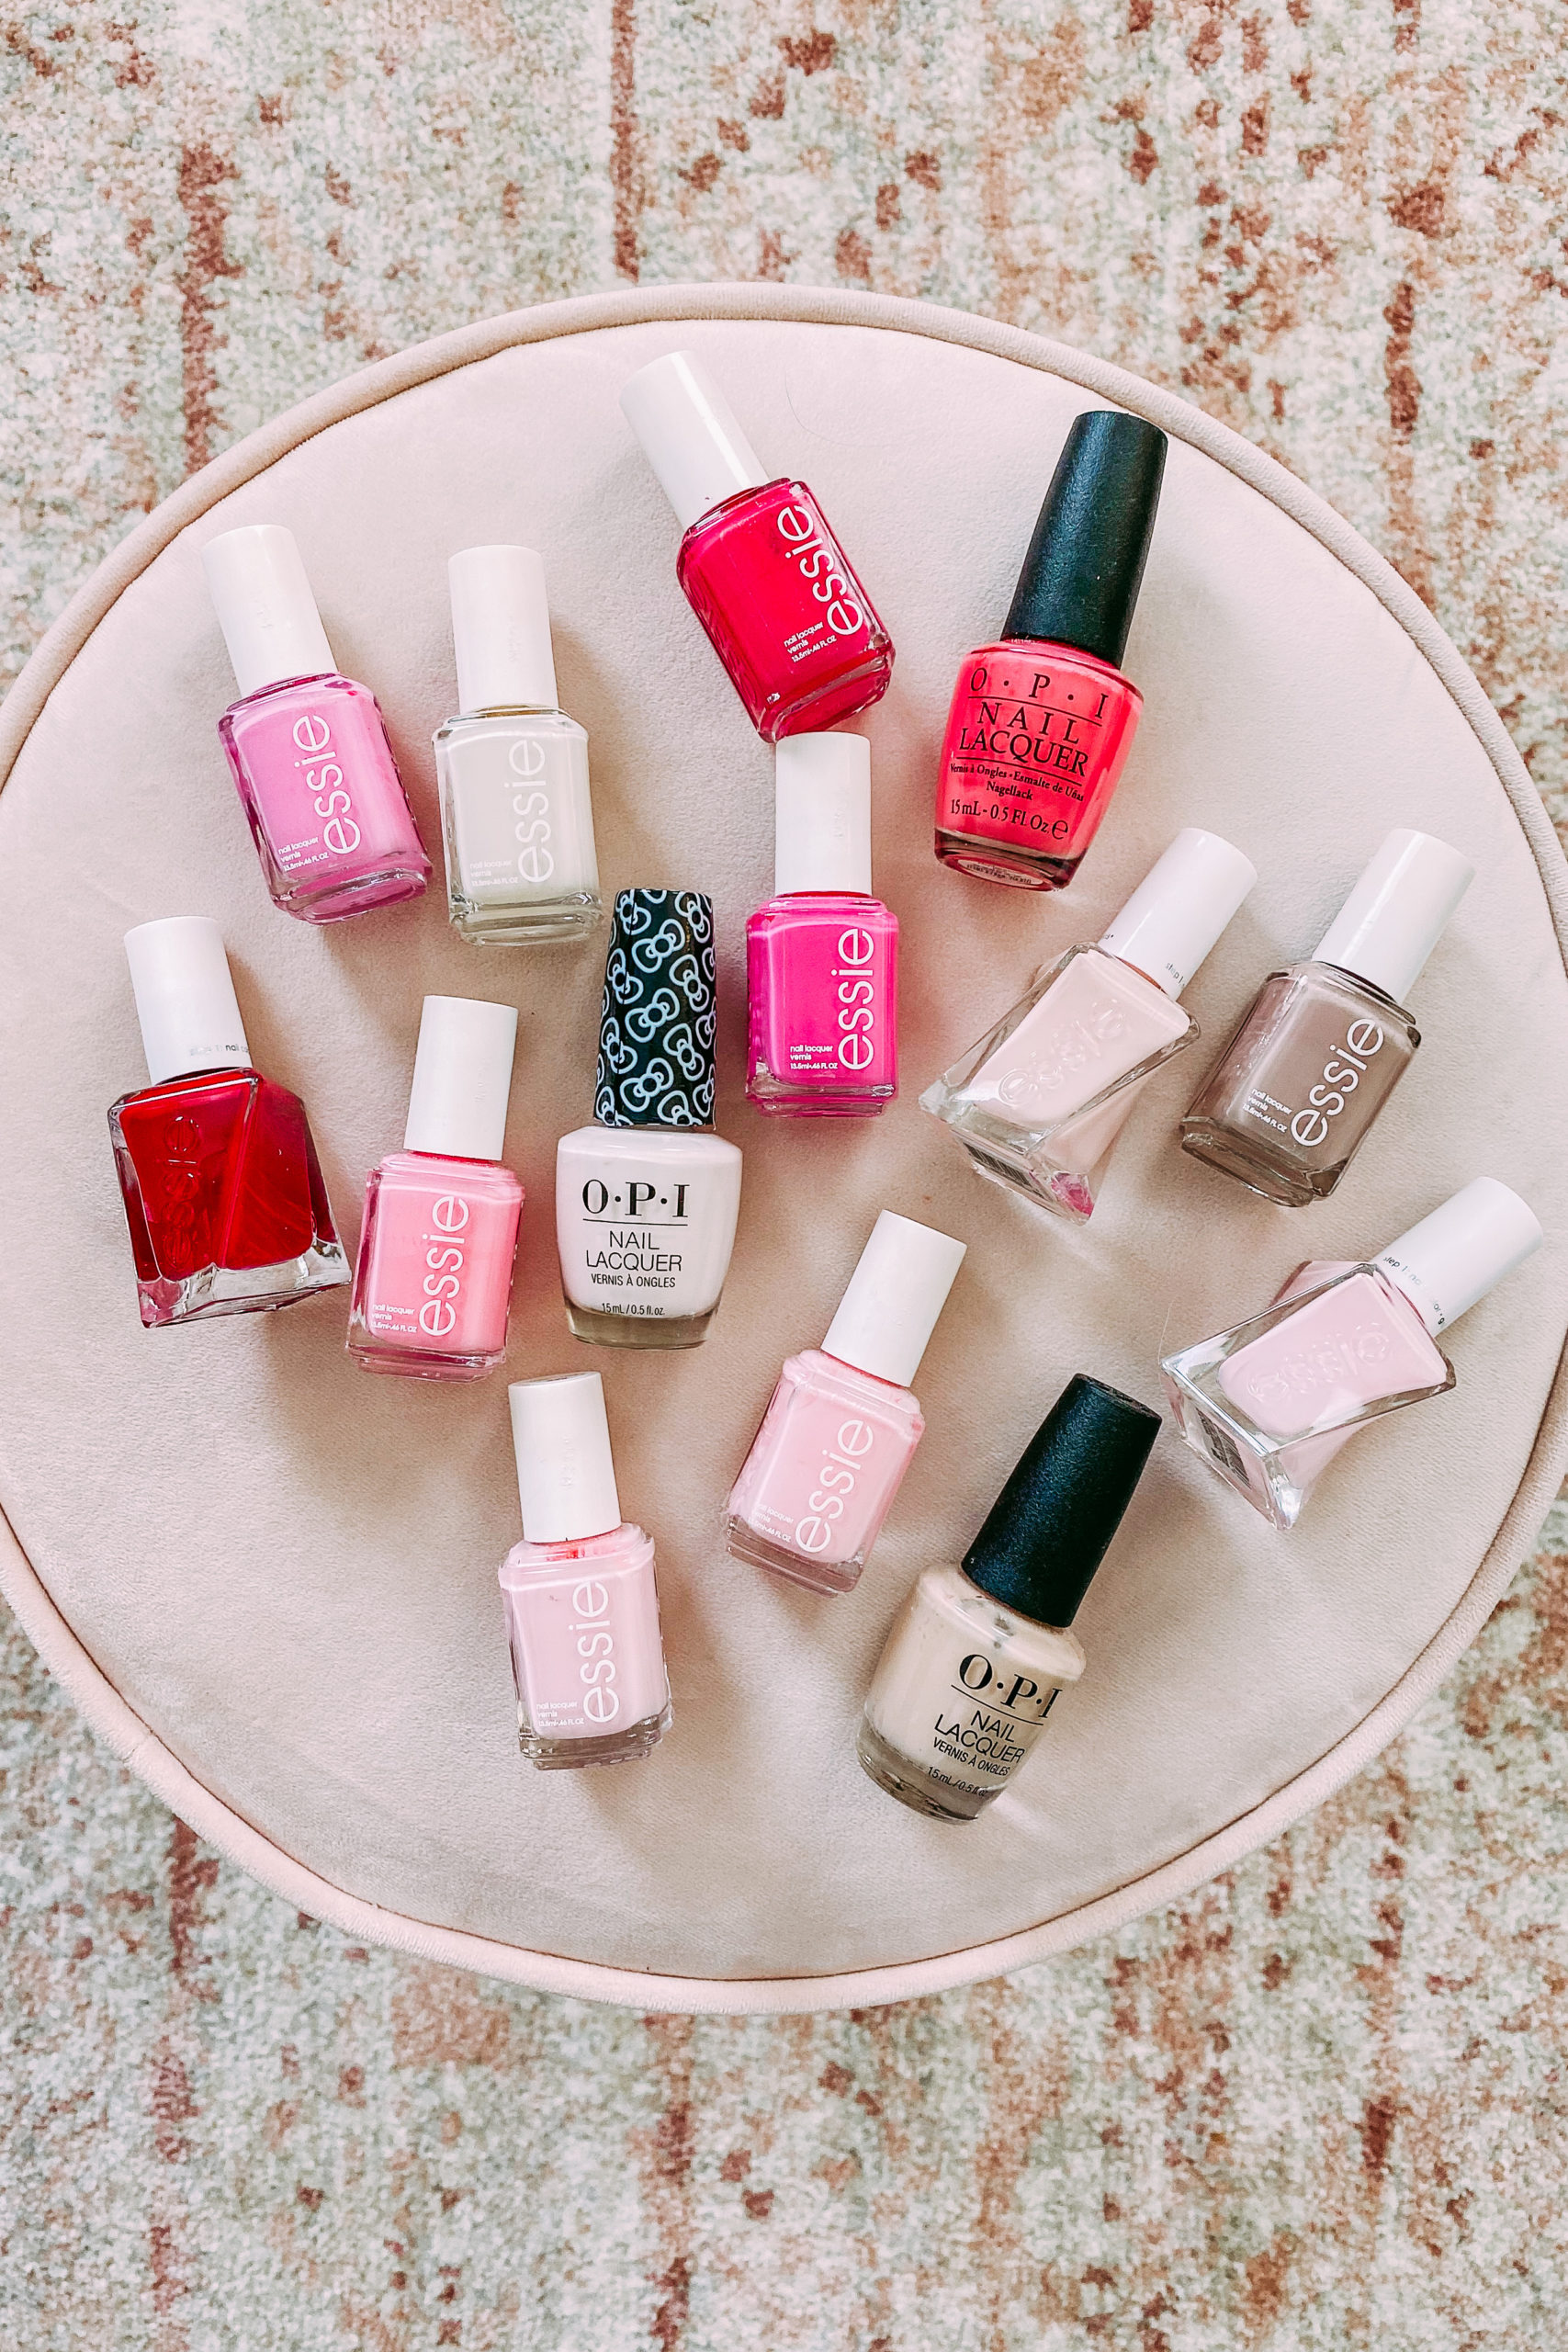 Products For The Best At-Home Manicure + My Favorite Nail Polishes -  Thrifty Pineapple